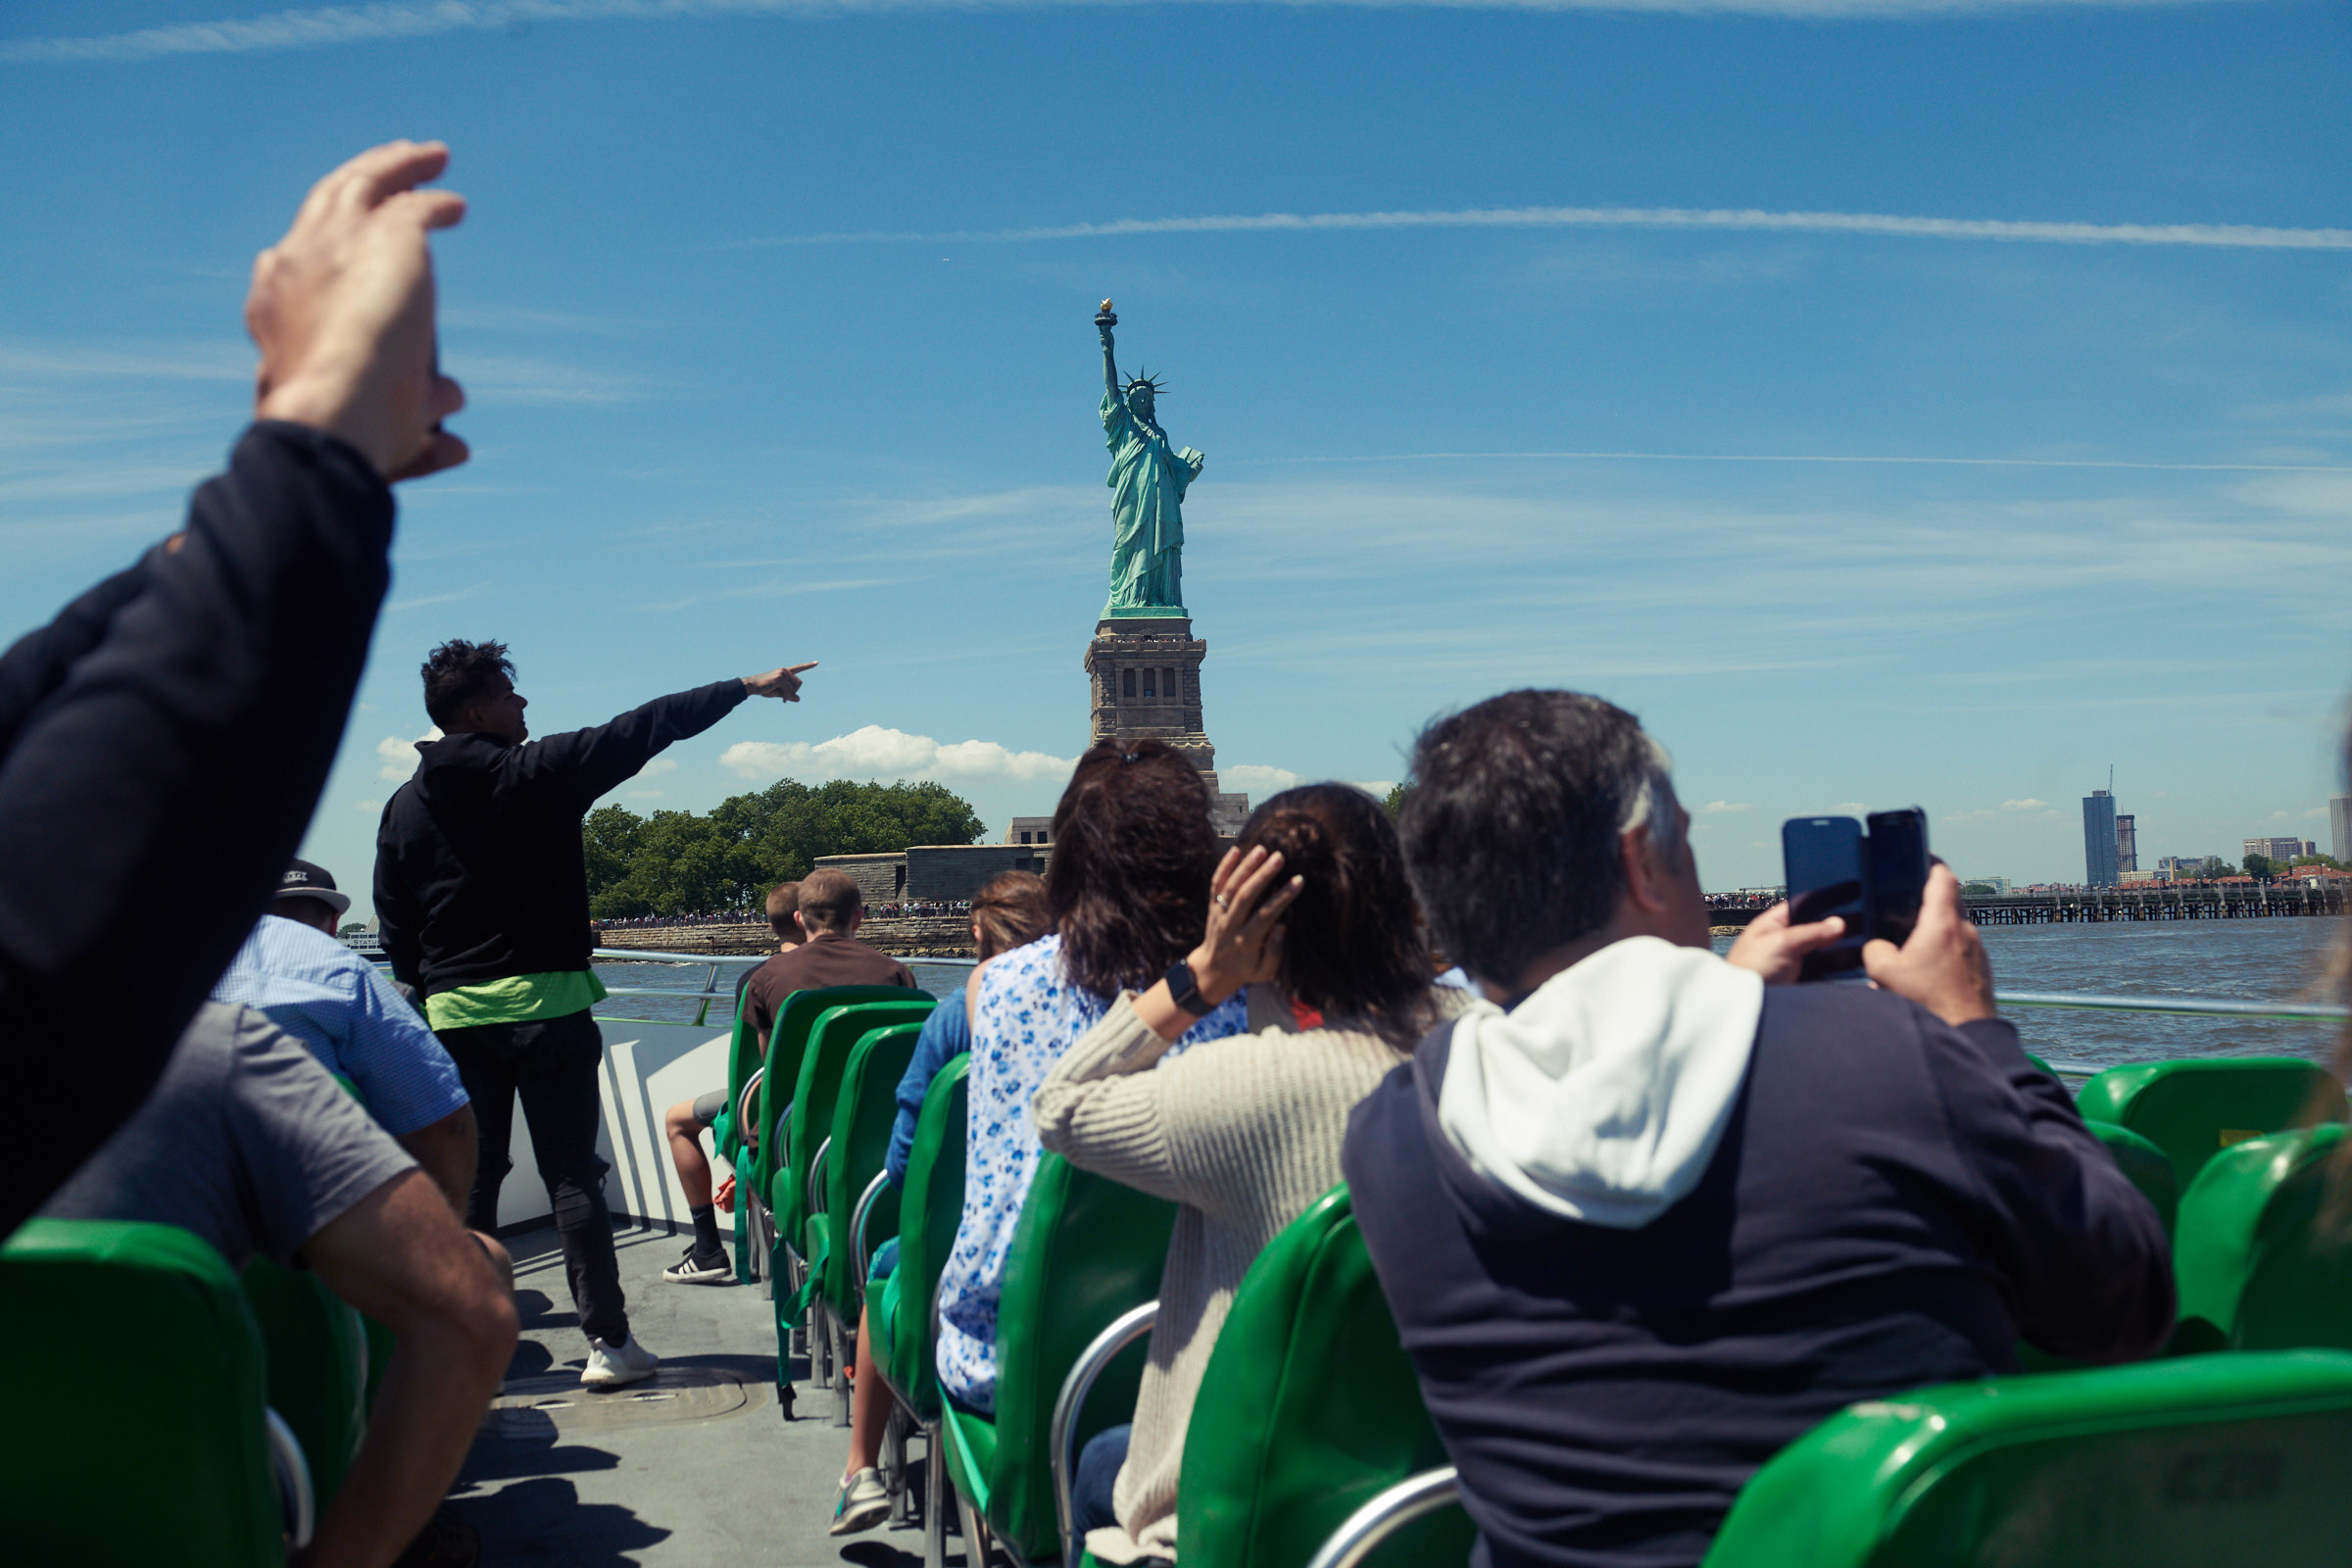 Passengers taking photos of the Statue of Liberty from the boat